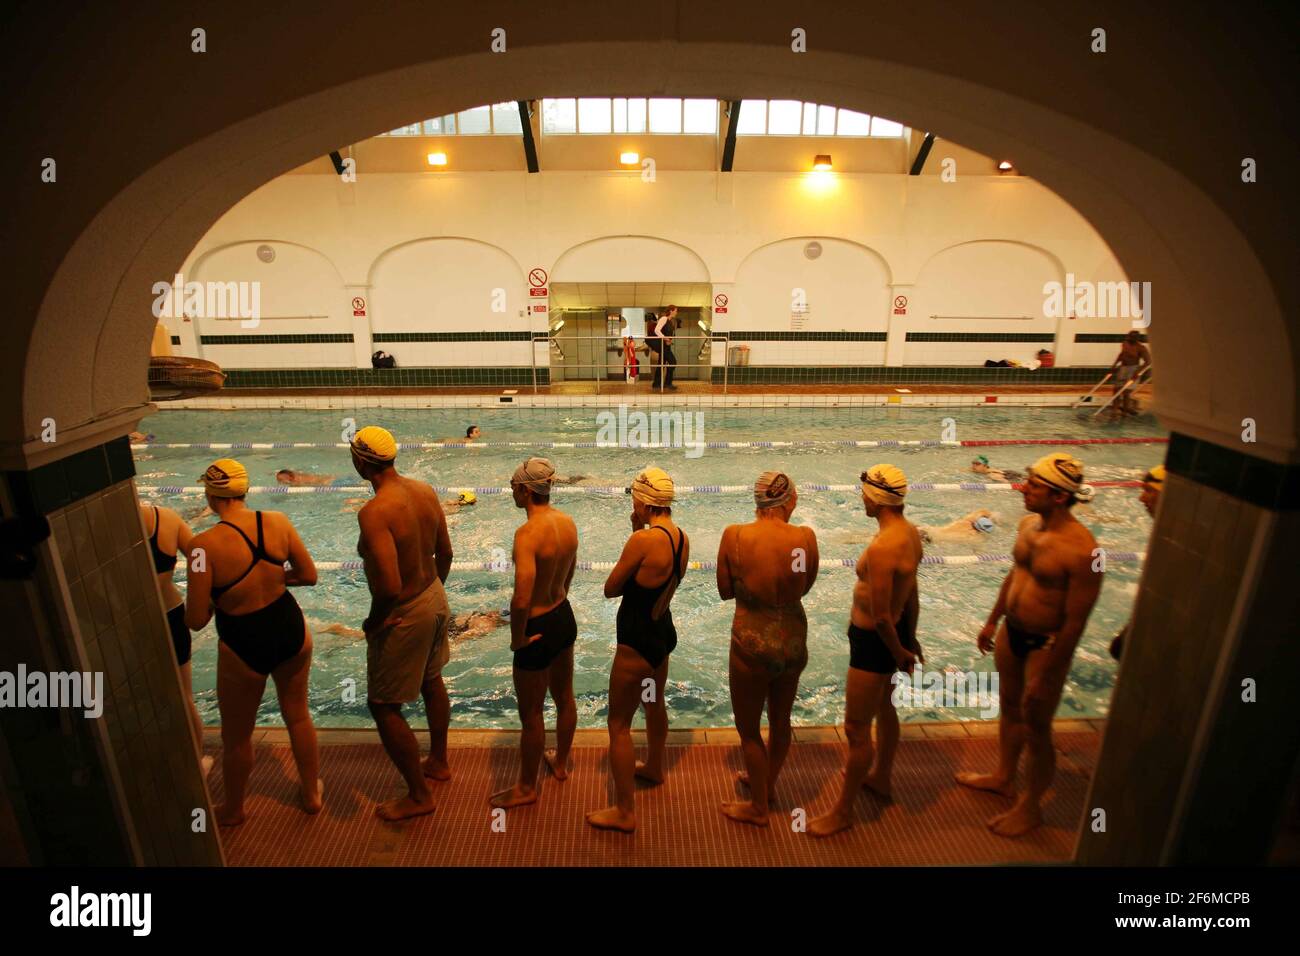 Art Film by Amy Sharrocks  The Big Swim 50 swimmers travel across London swimming in 10 Pools, 3 Lidos and 2 Lakes. Starting at Tooting Bec Lido and finishing at Hampstead Heath Swimming Ponds.  pic David Sandison 12 July 2007 Stock Photo